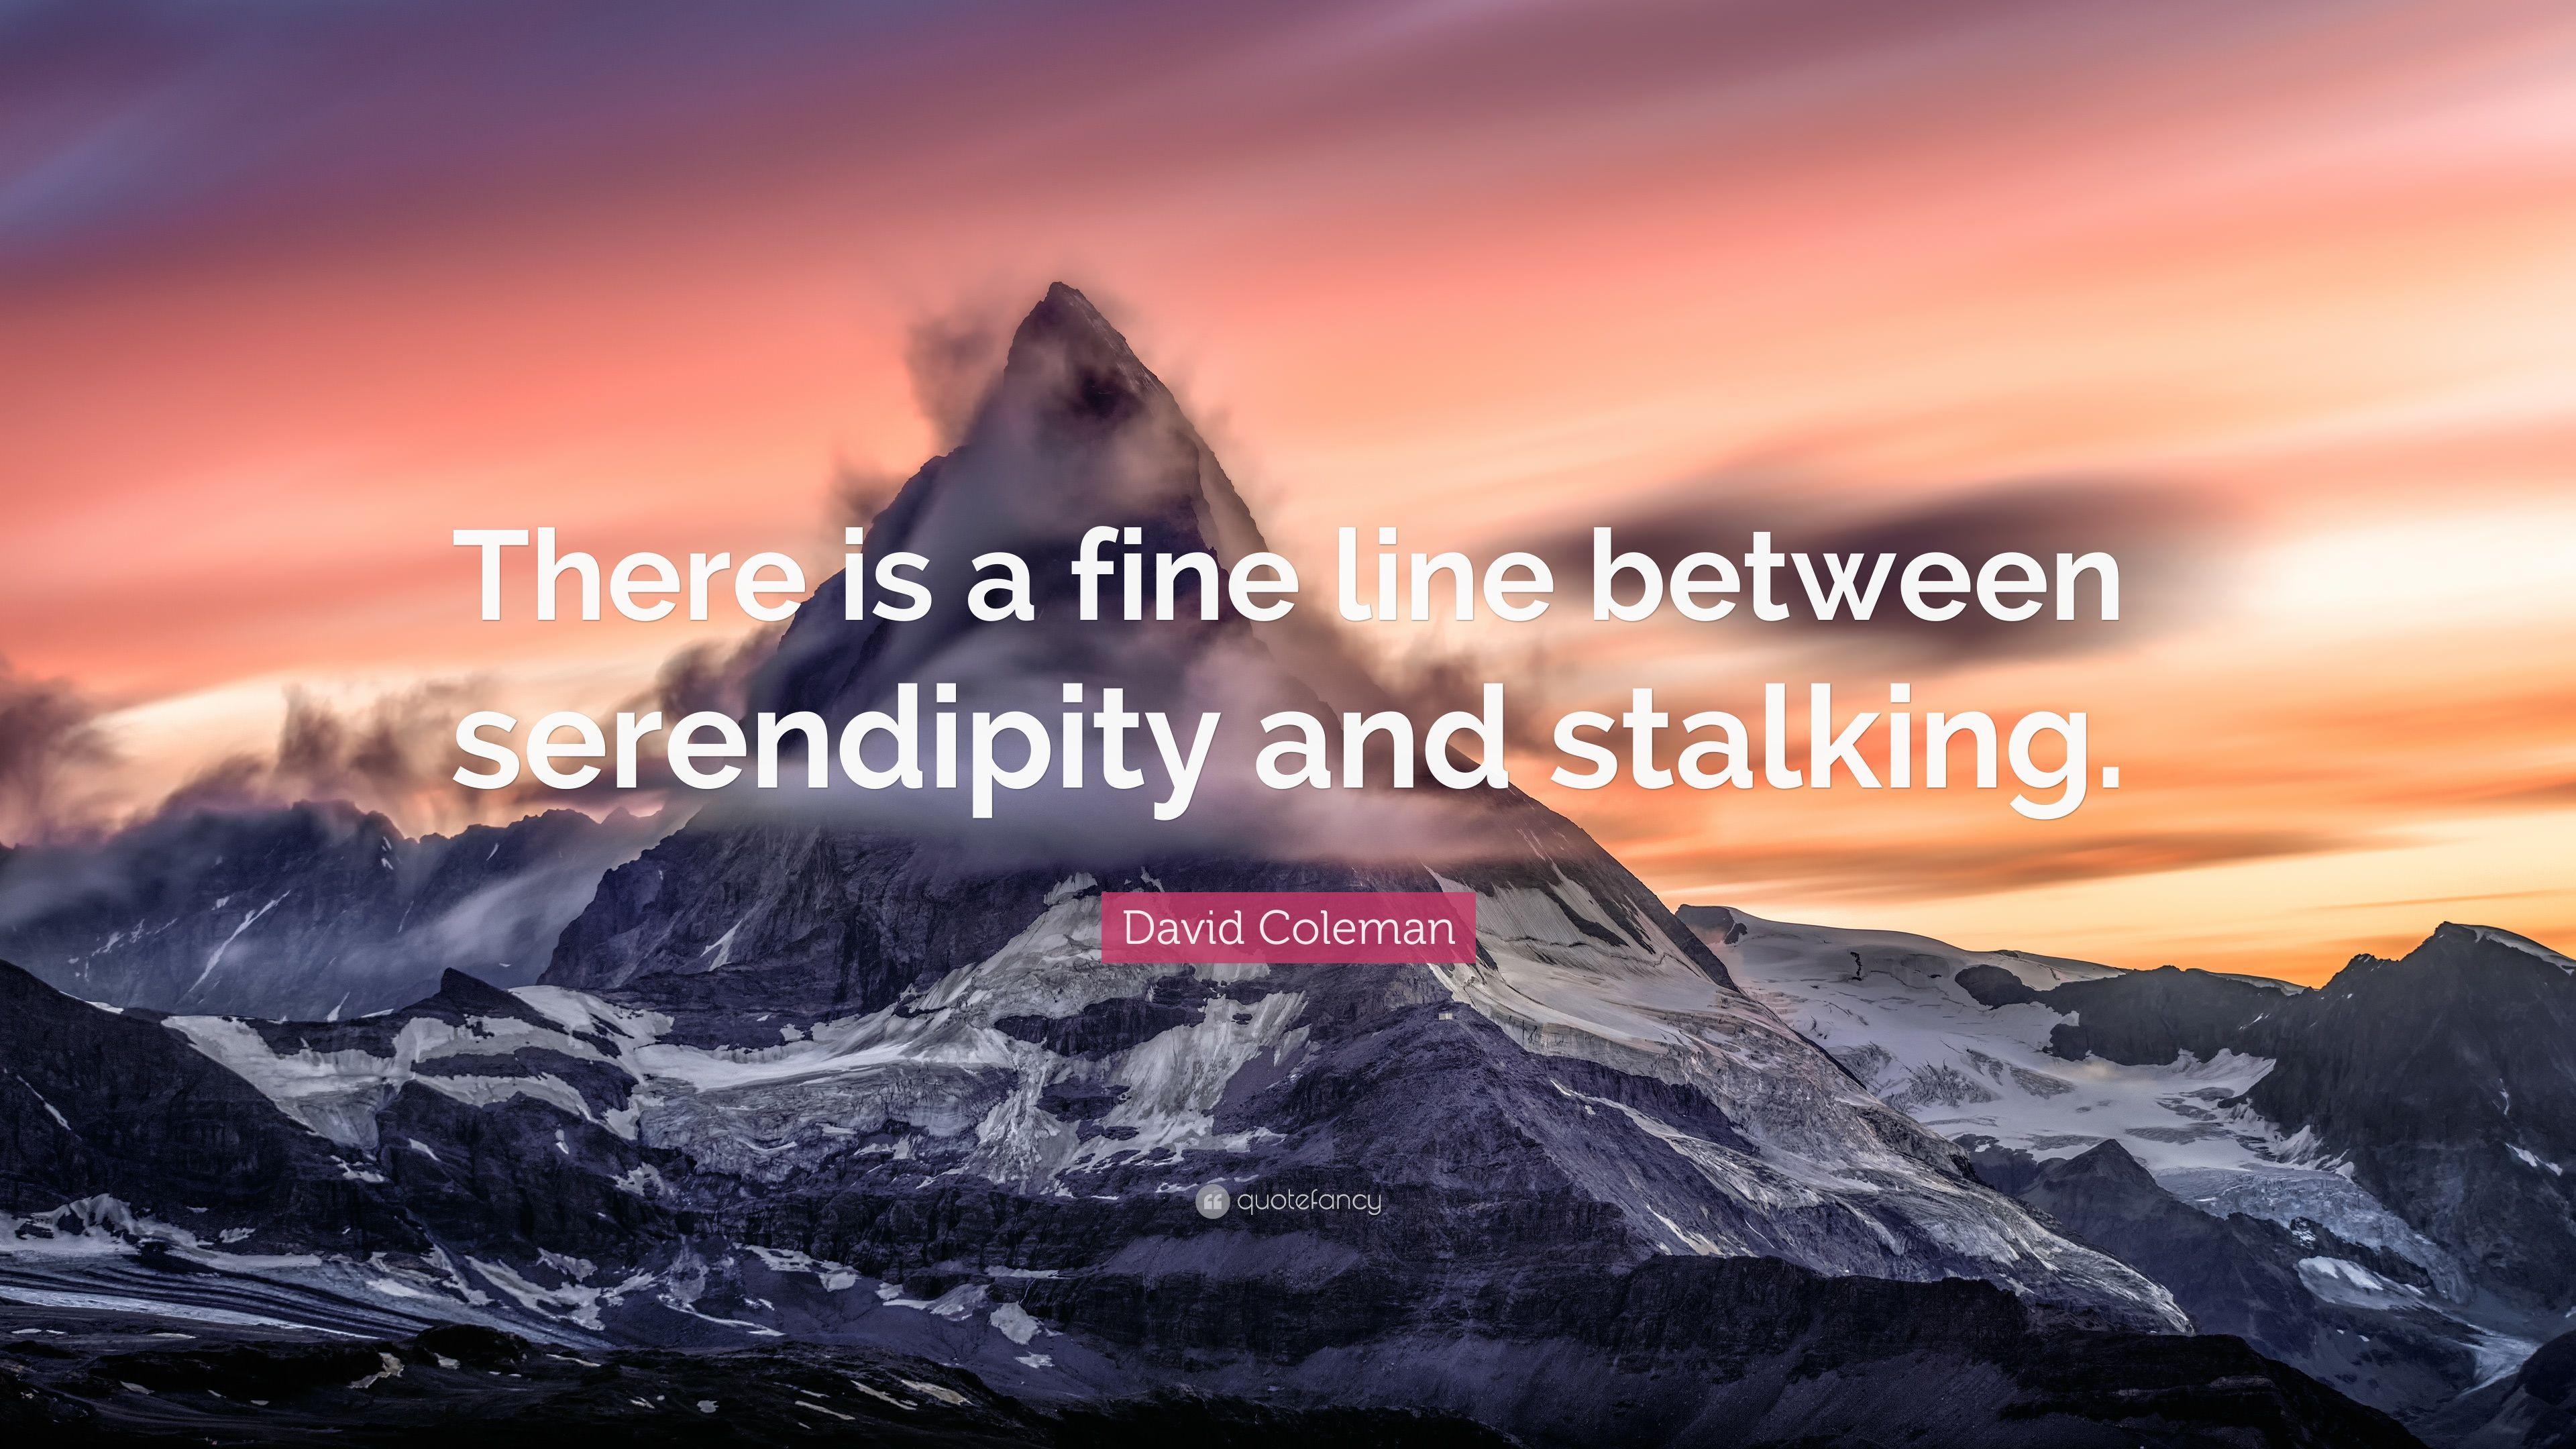 David Coleman Quote: “There is a fine line between serendipity